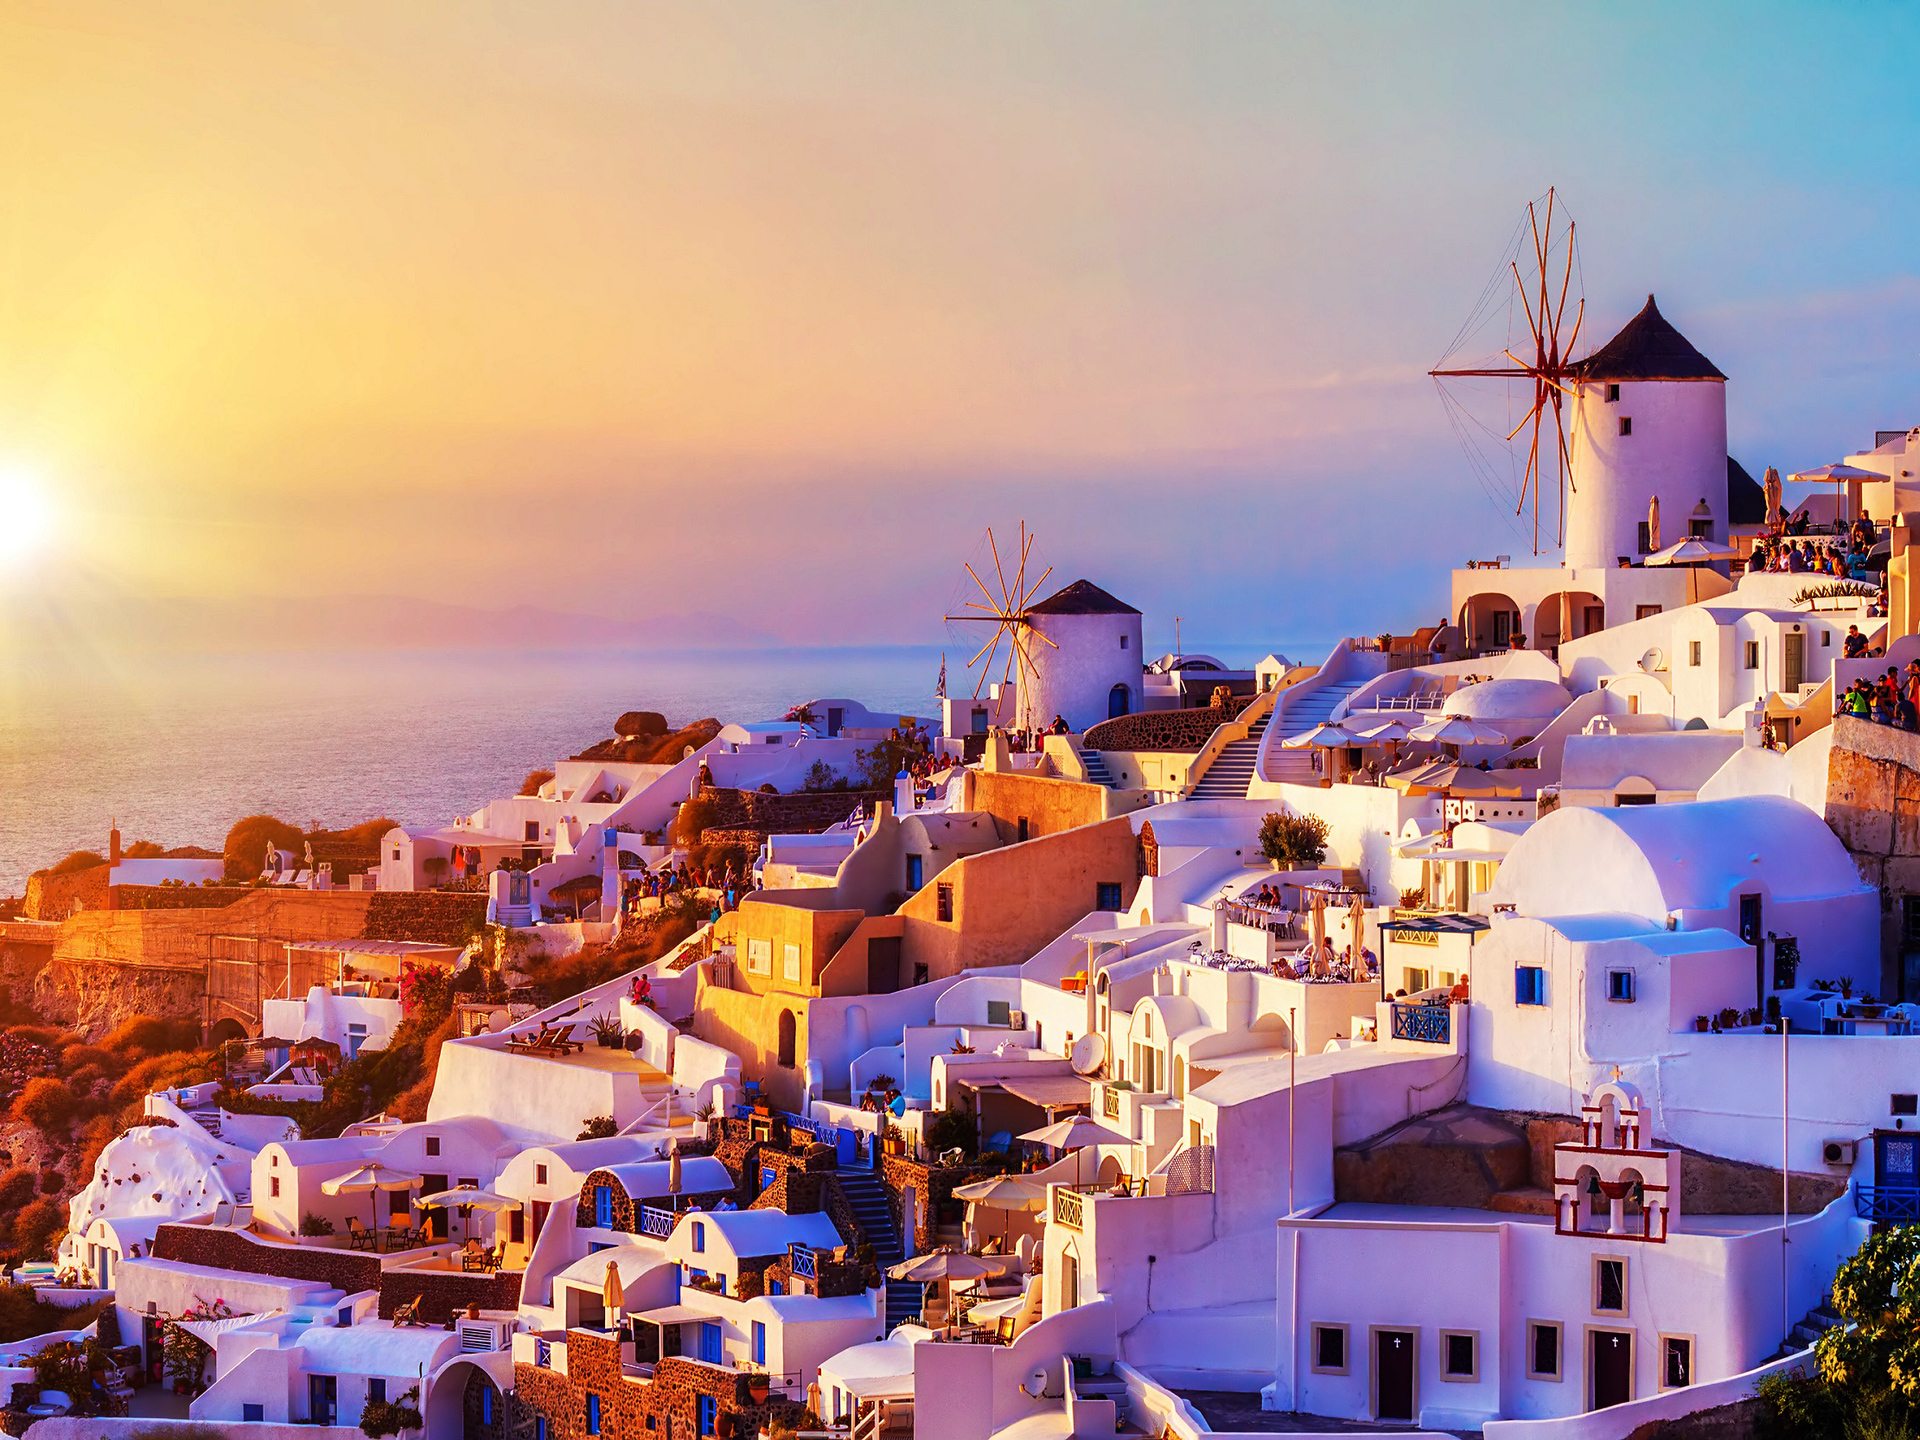 The spectacular sunset over the Oia village in Santorini, Greece ...